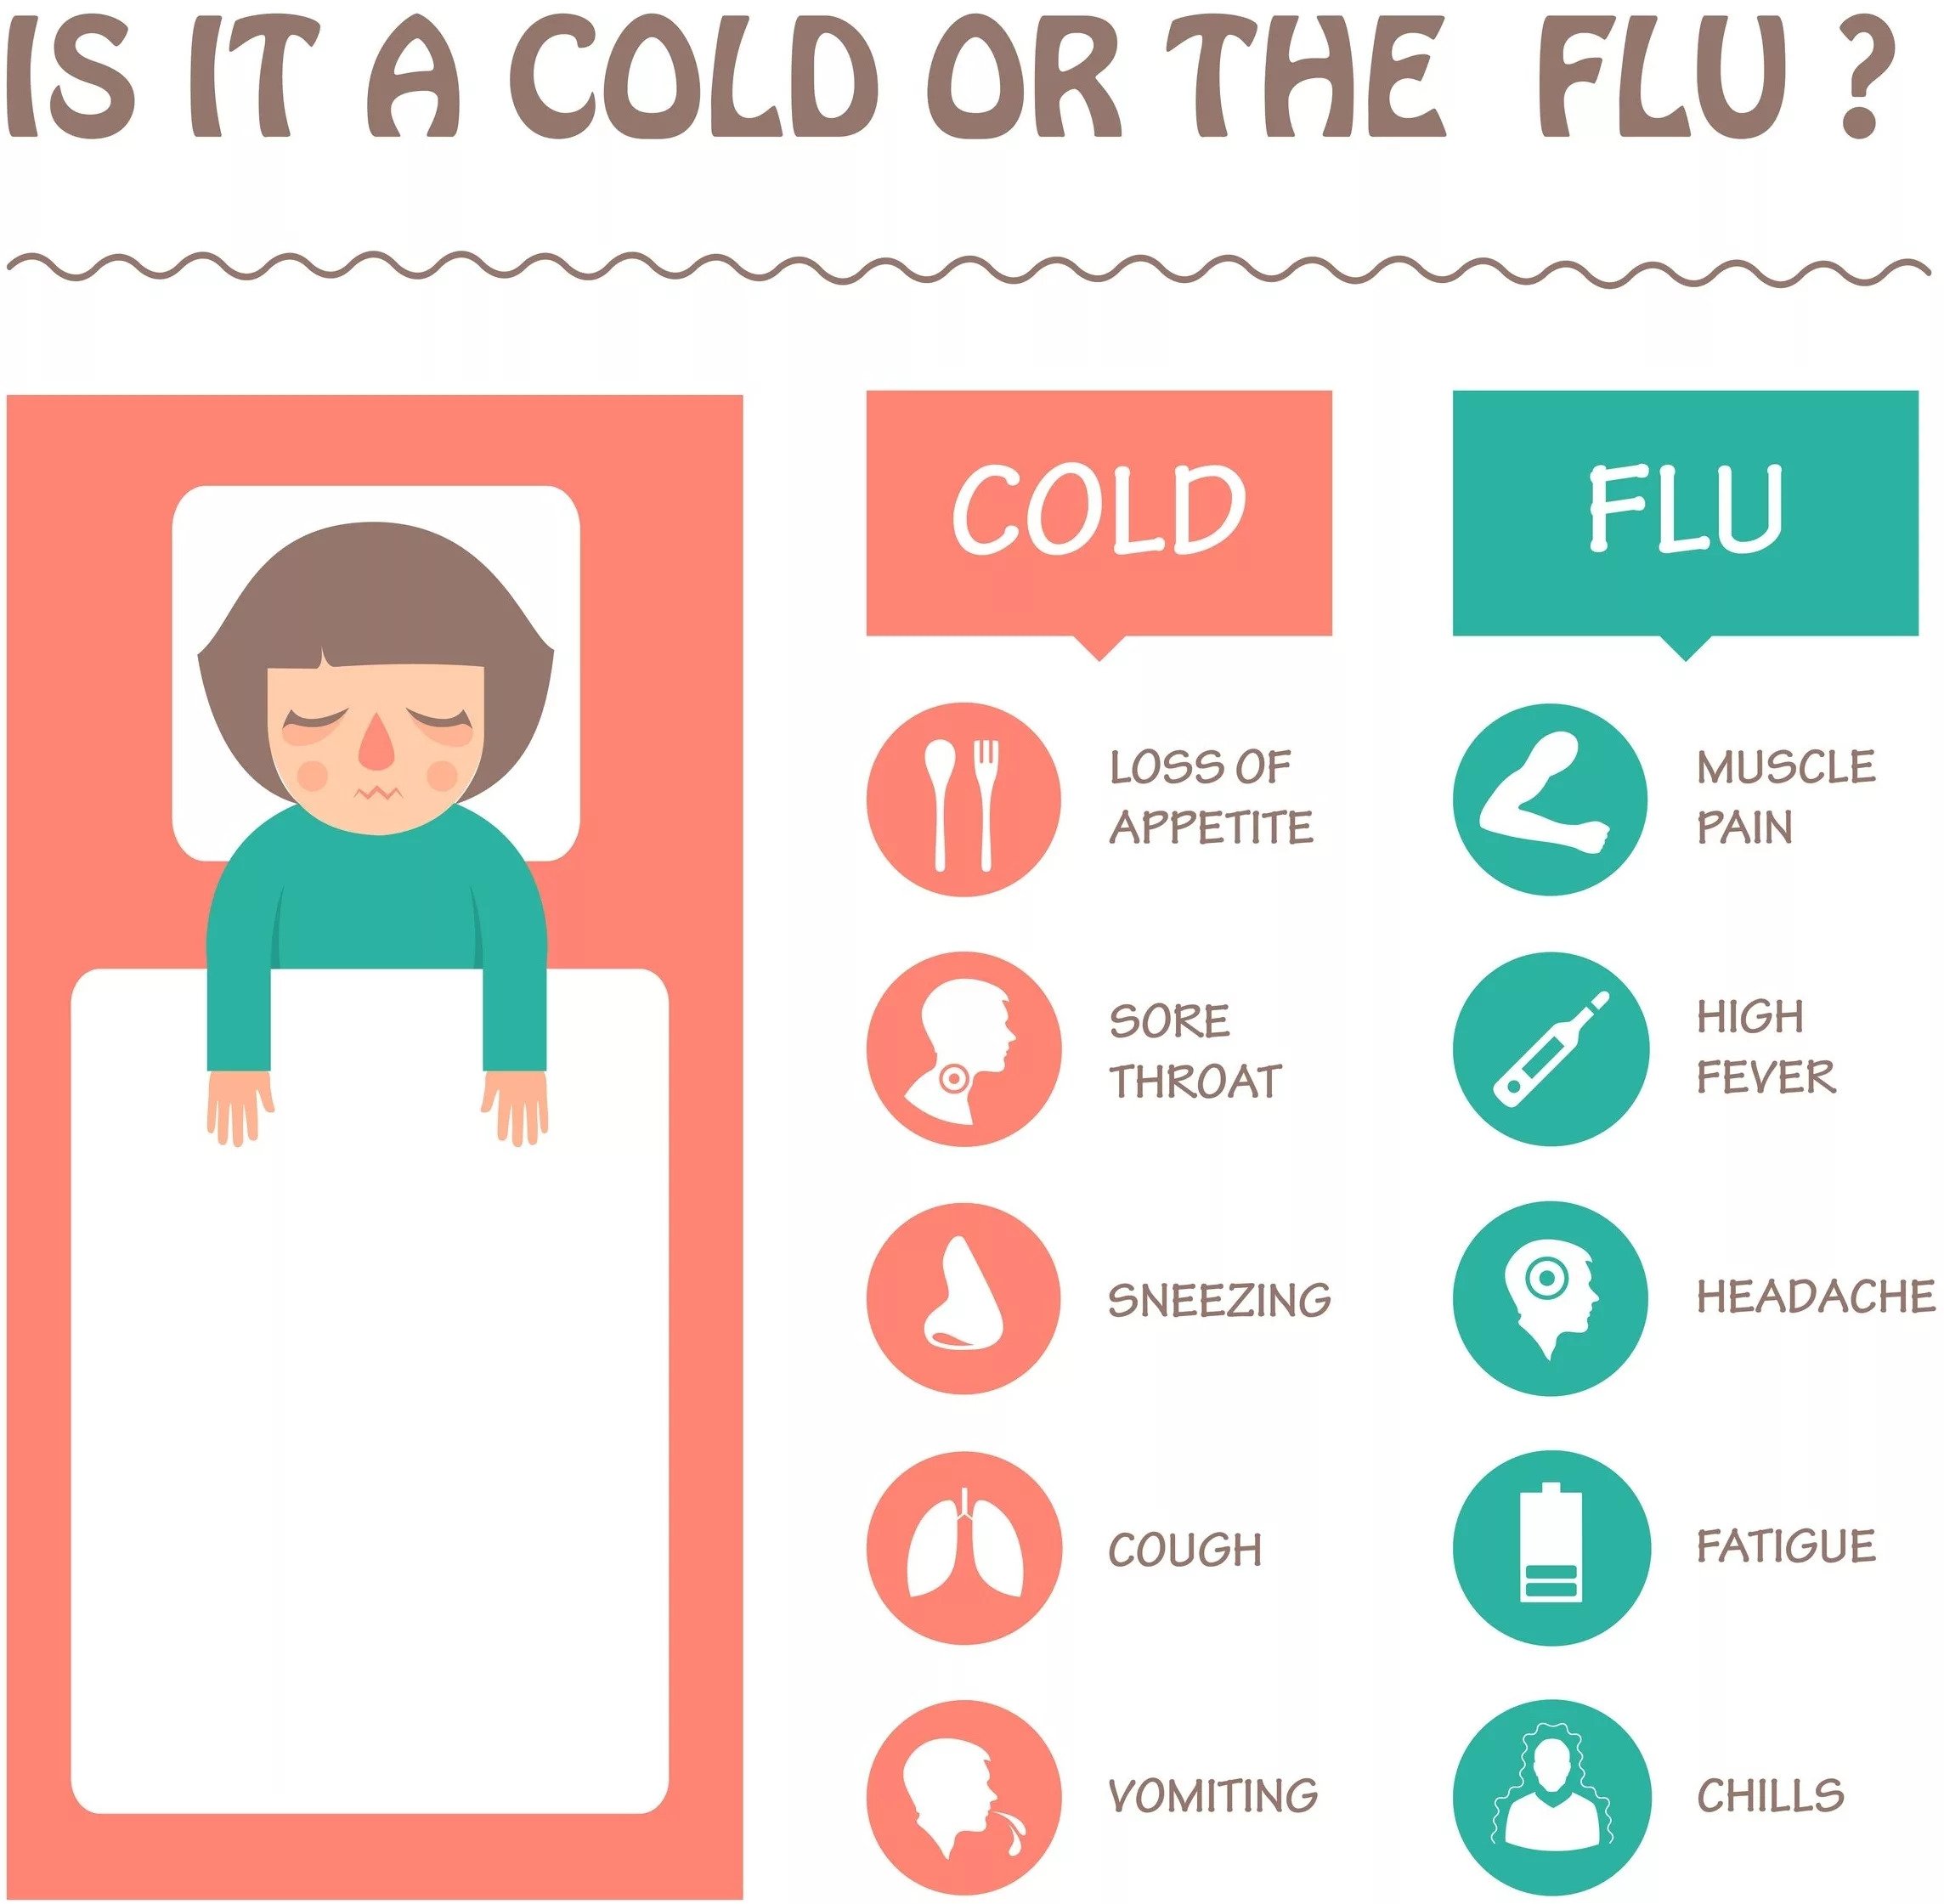 Is it a cold or the flu?